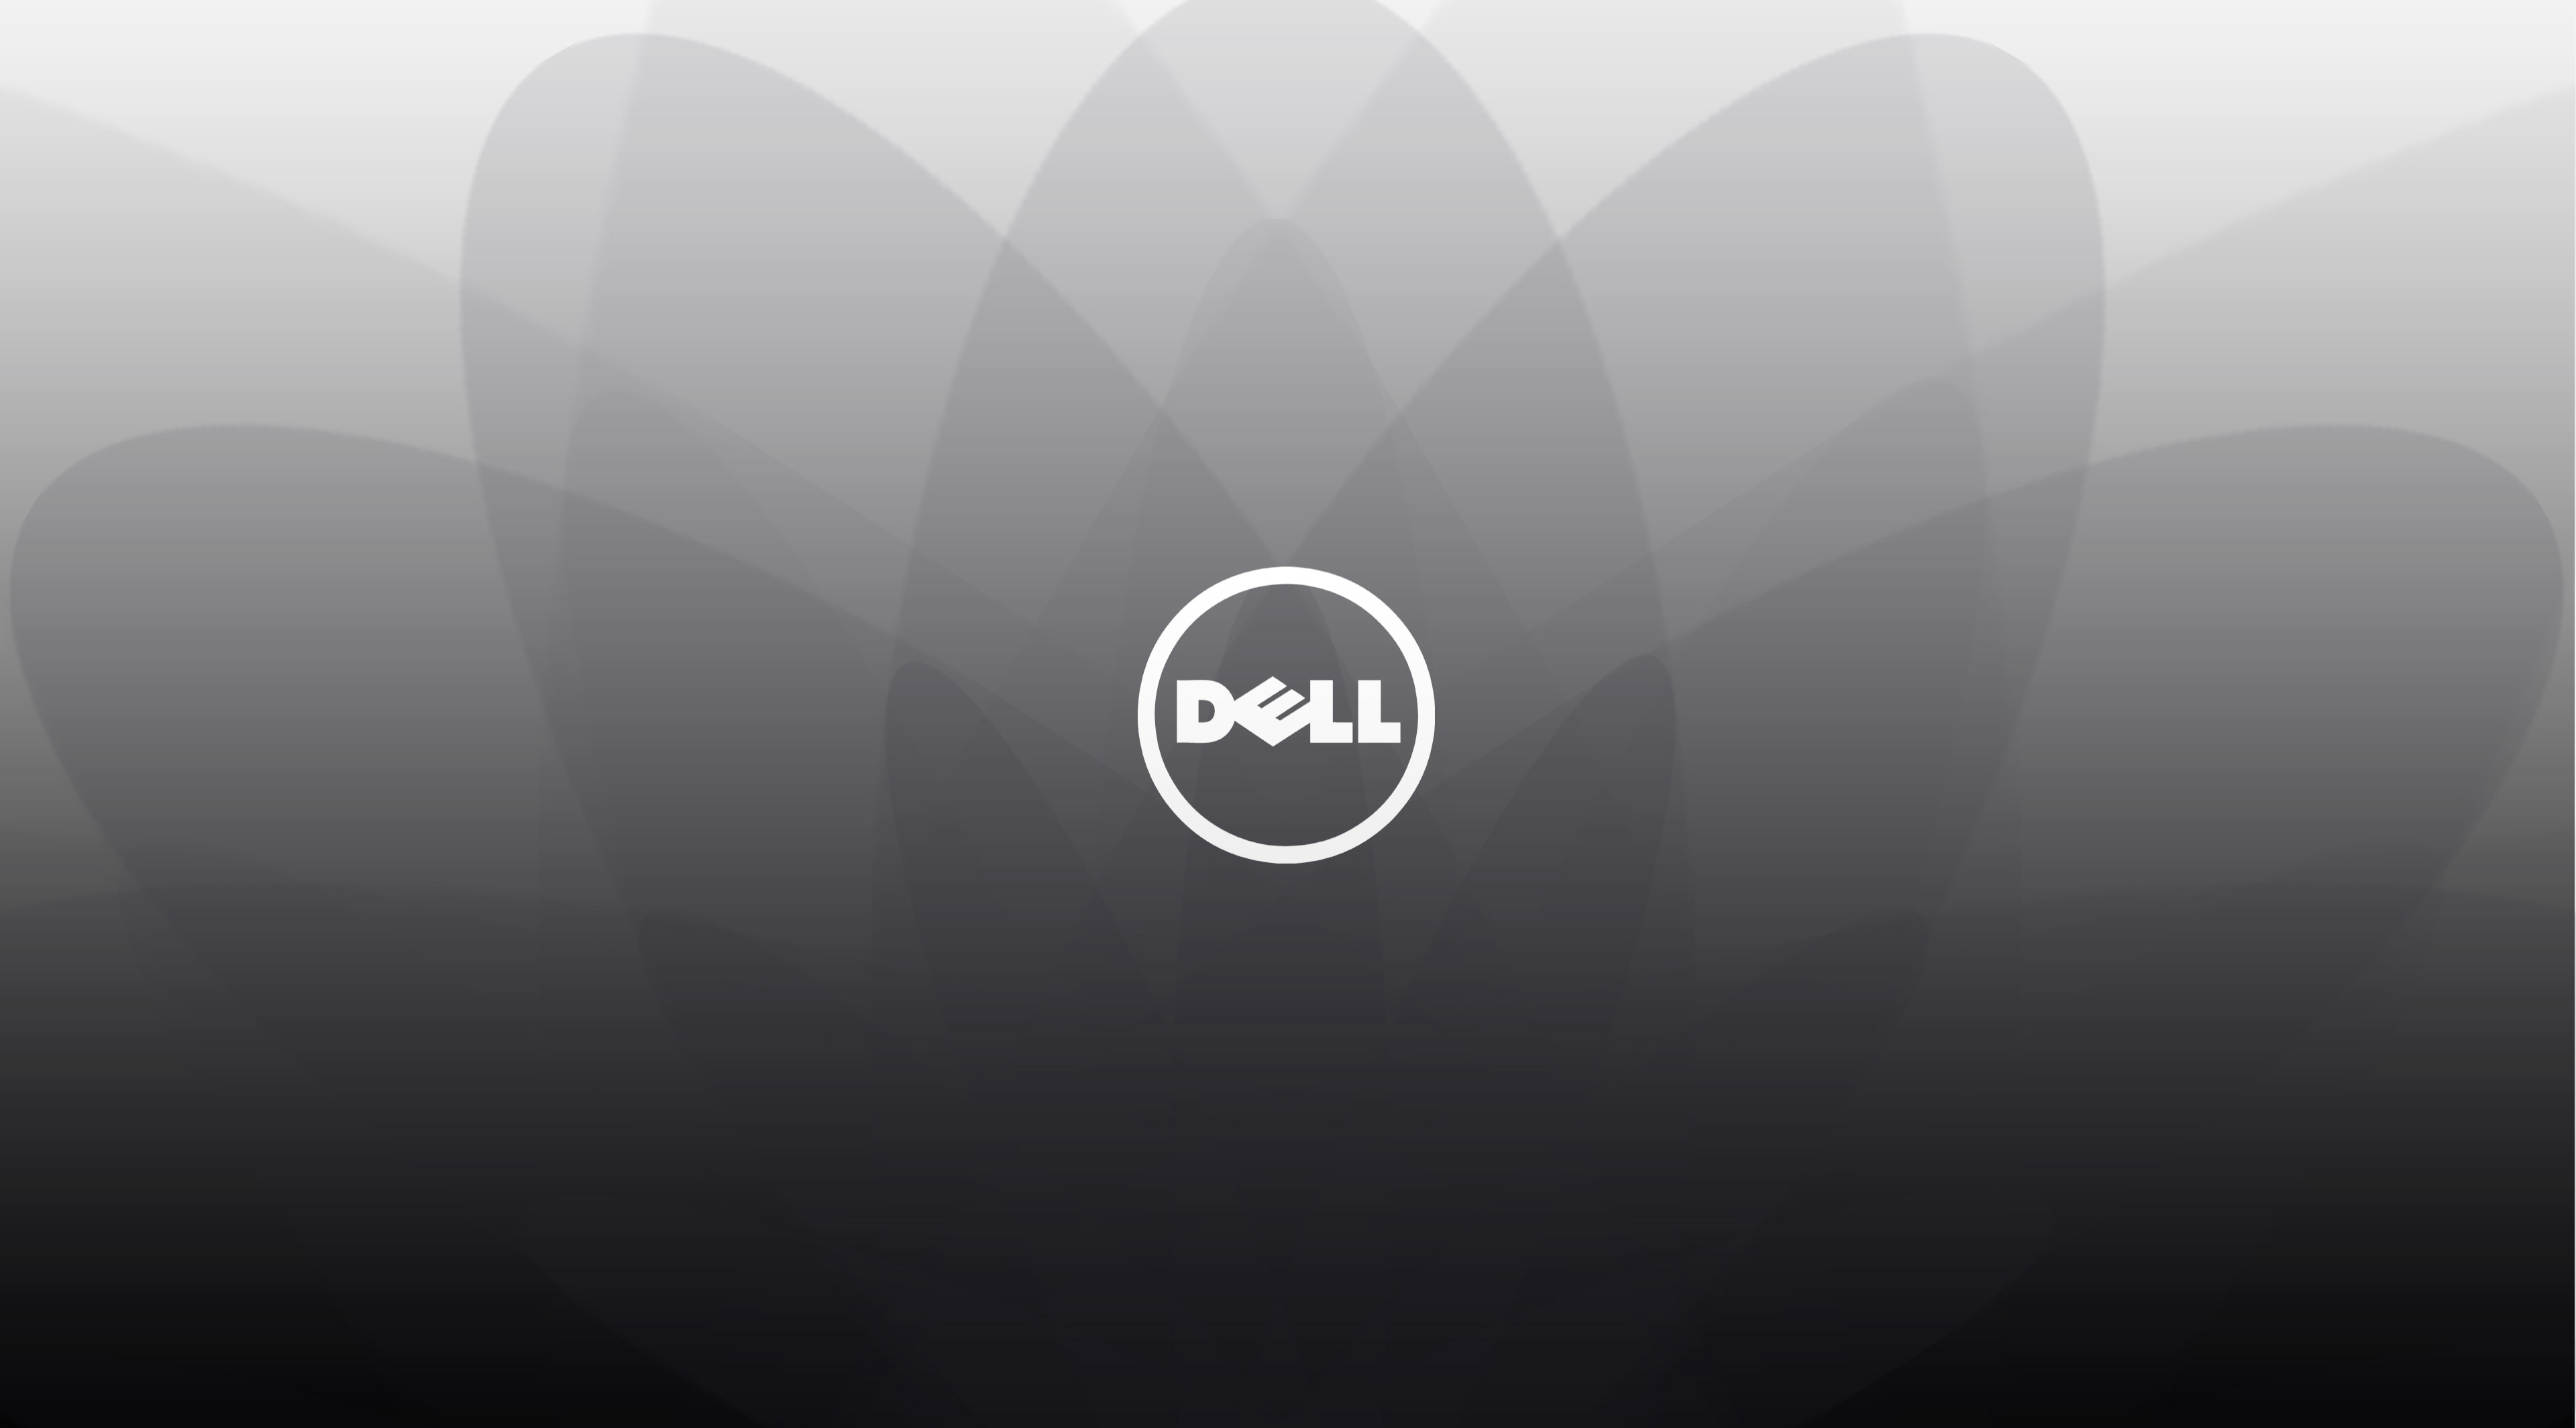 Dell Wallpaper 78 Pictures